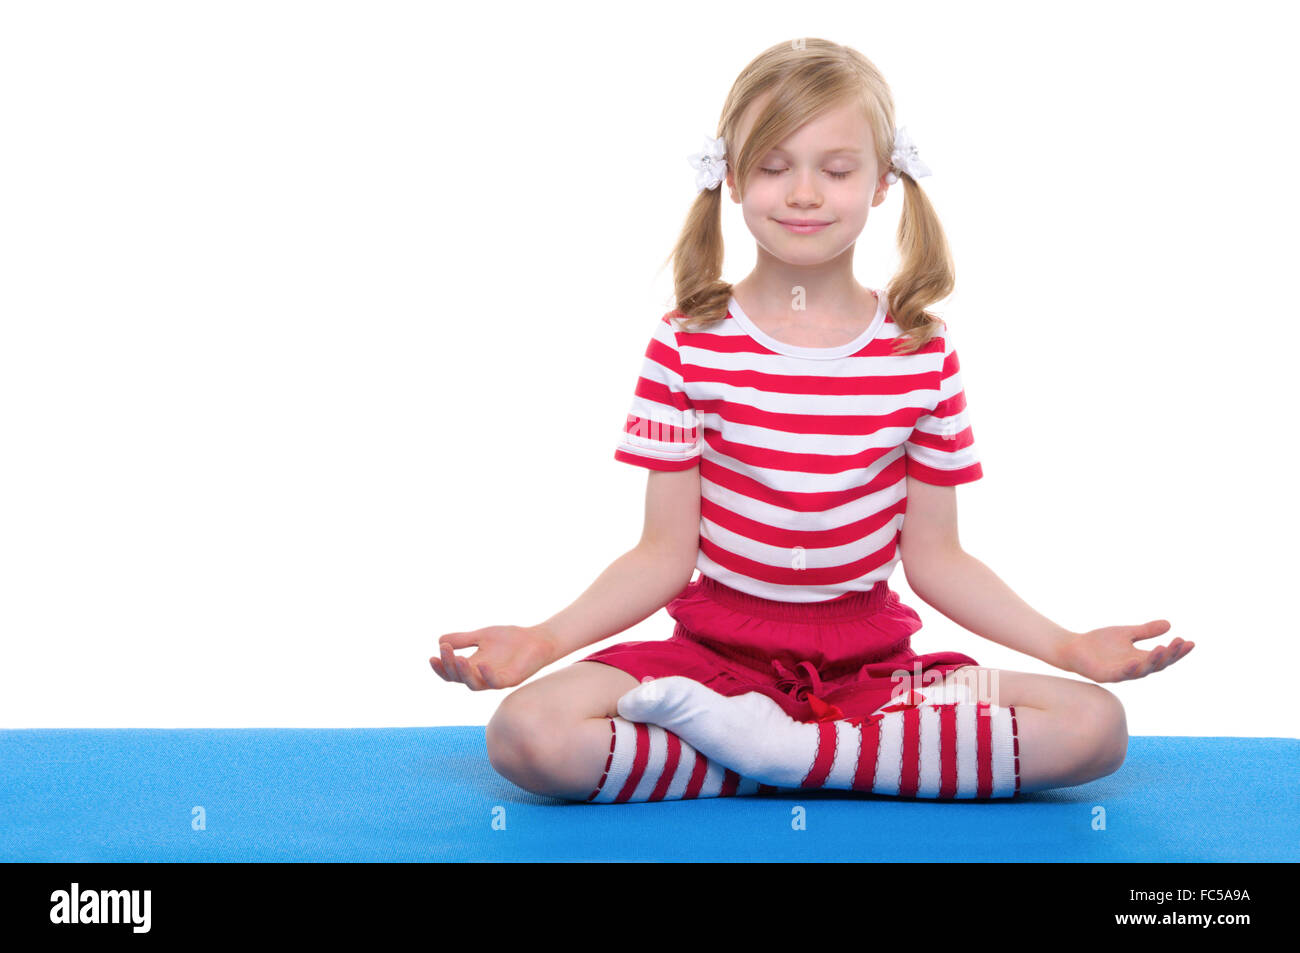 girl with eyes closed practicing yoga Stock Photo